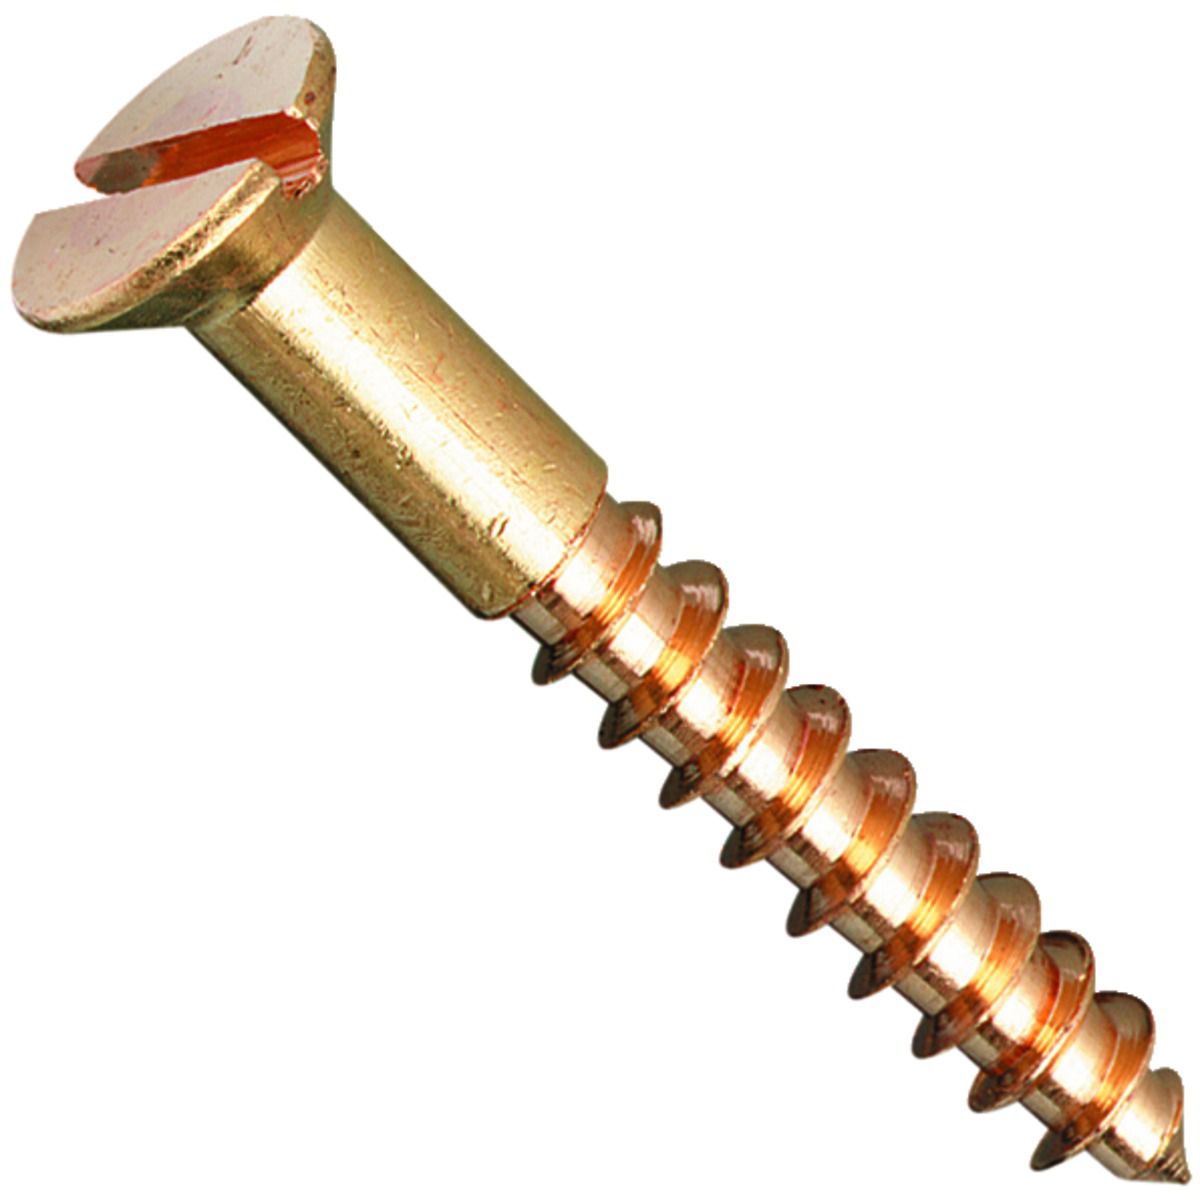 Image of Wickes Brass Wood Screws - No 10 x 50mm Pack of 10